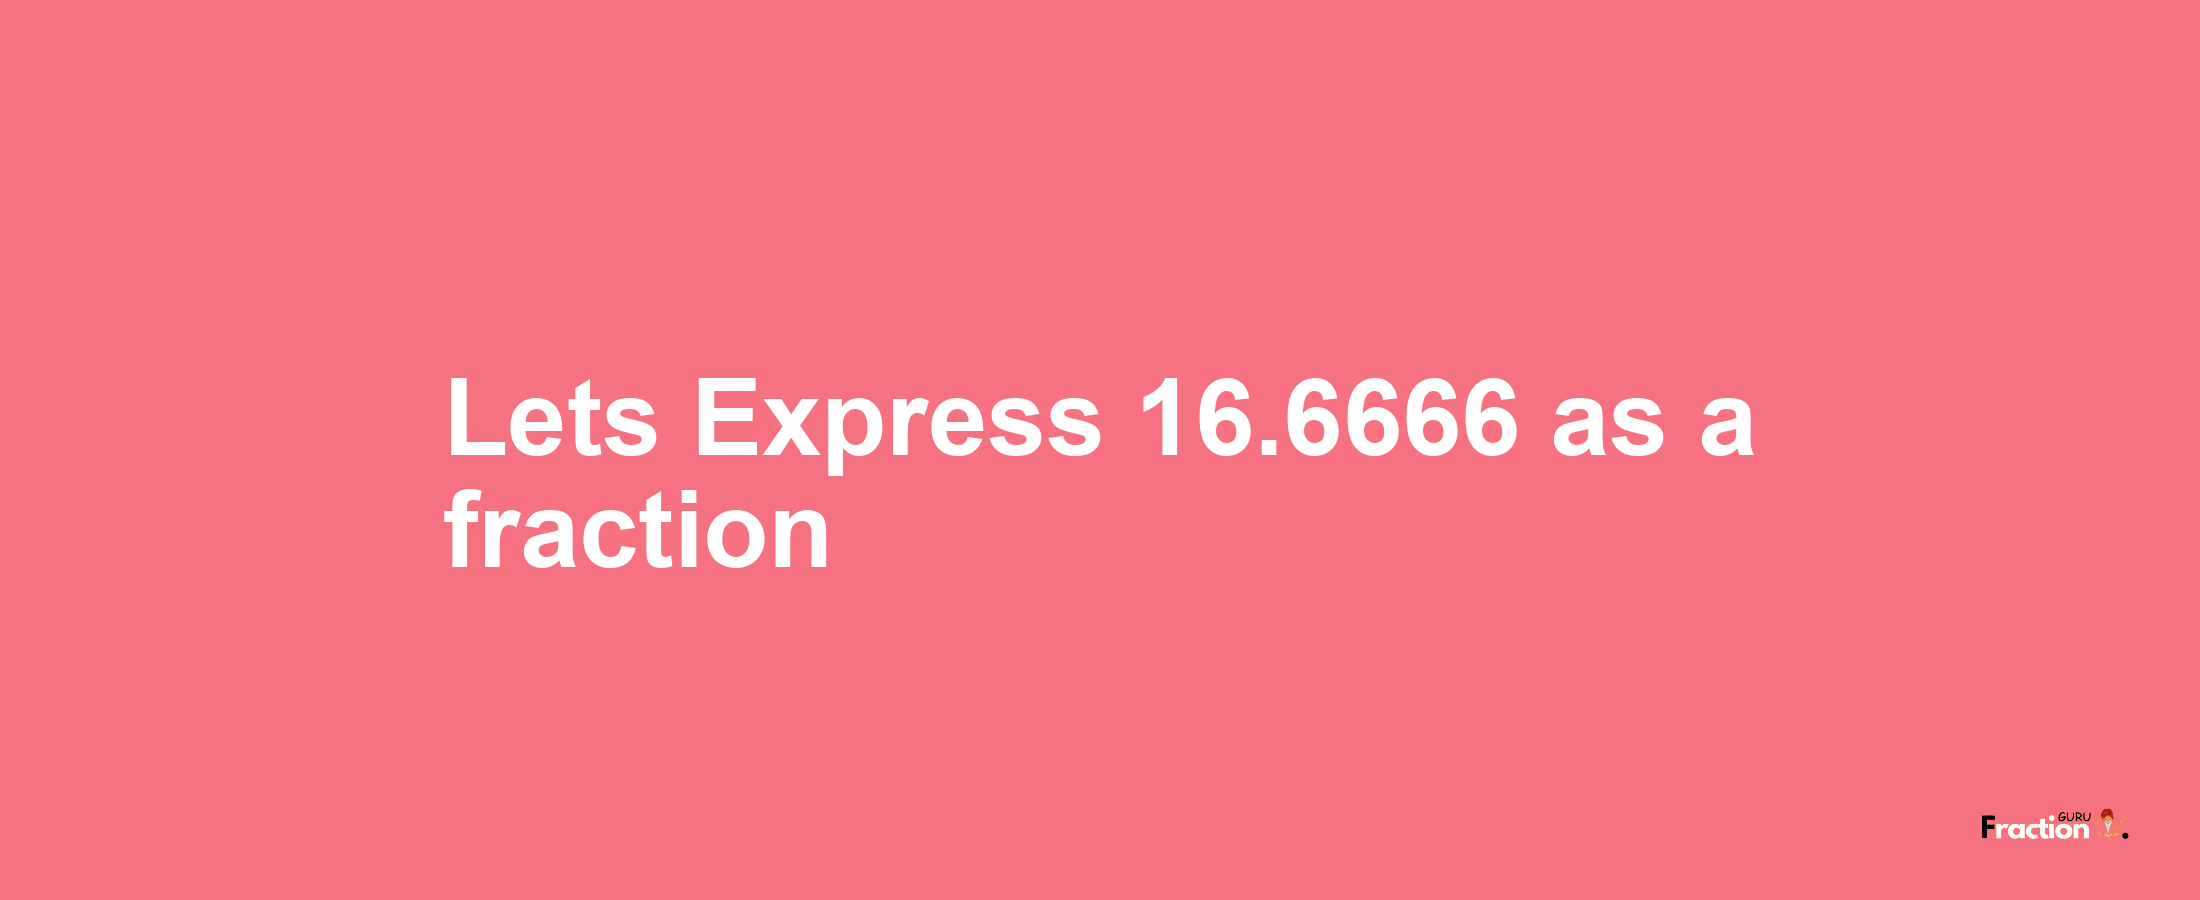 Lets Express 16.6666 as afraction